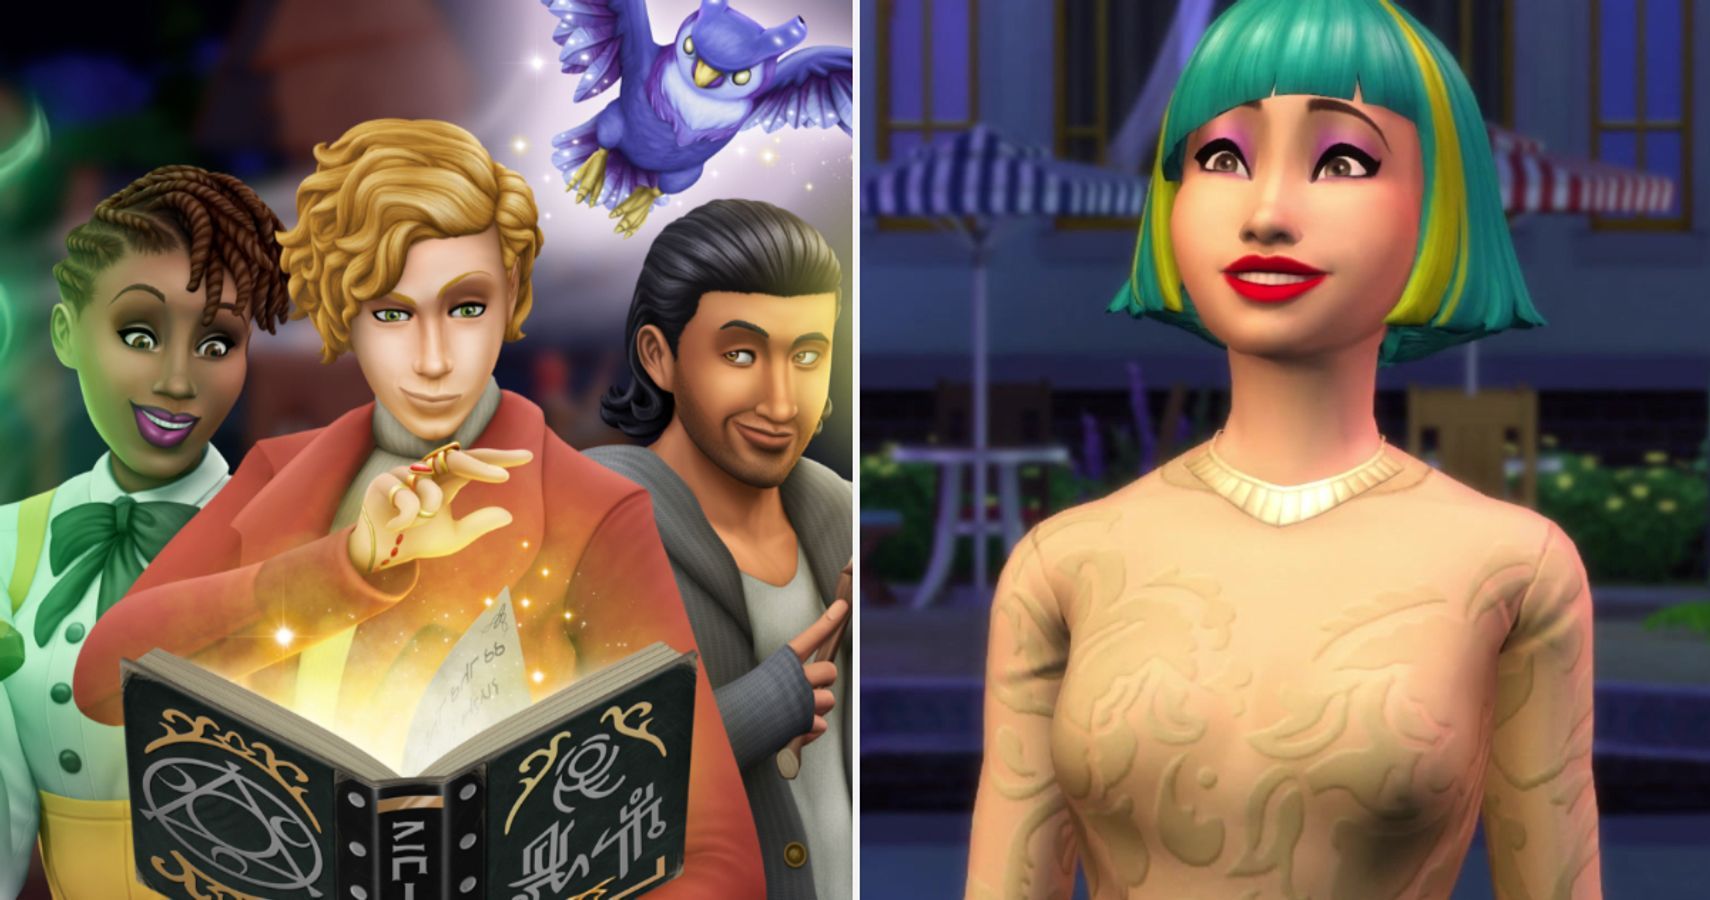 how much do all the sims 4 expansions cost